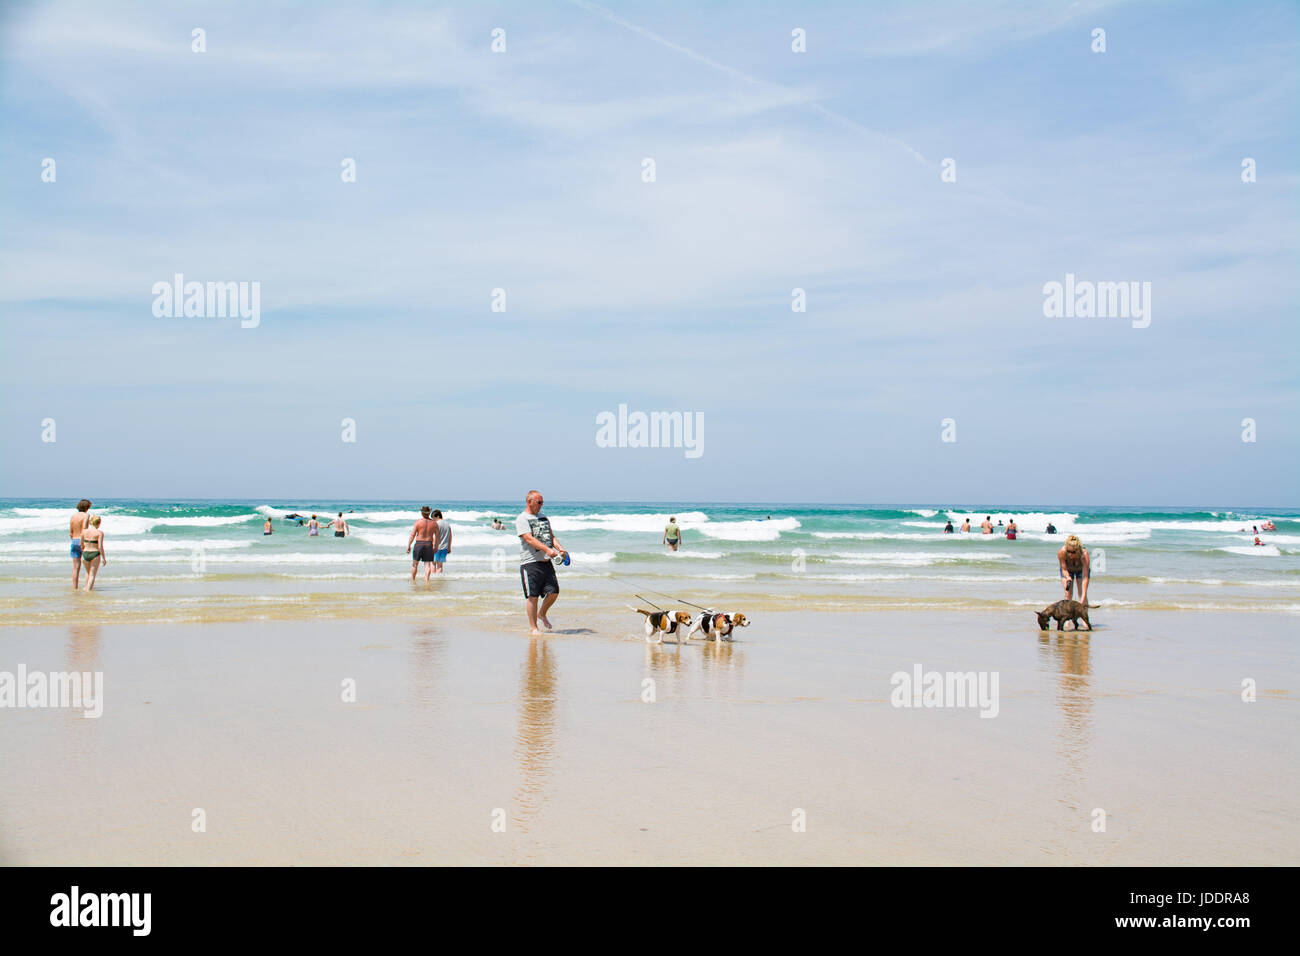 Perranporth, Cornwall, UK. 20th June, 2017. UK Weather. The car park was full at Perranporth beach today, as holidaymakers and locals made the most of the hot sunshine in Cornwall today. Credit: cwallpix/Alamy Live News Stock Photo